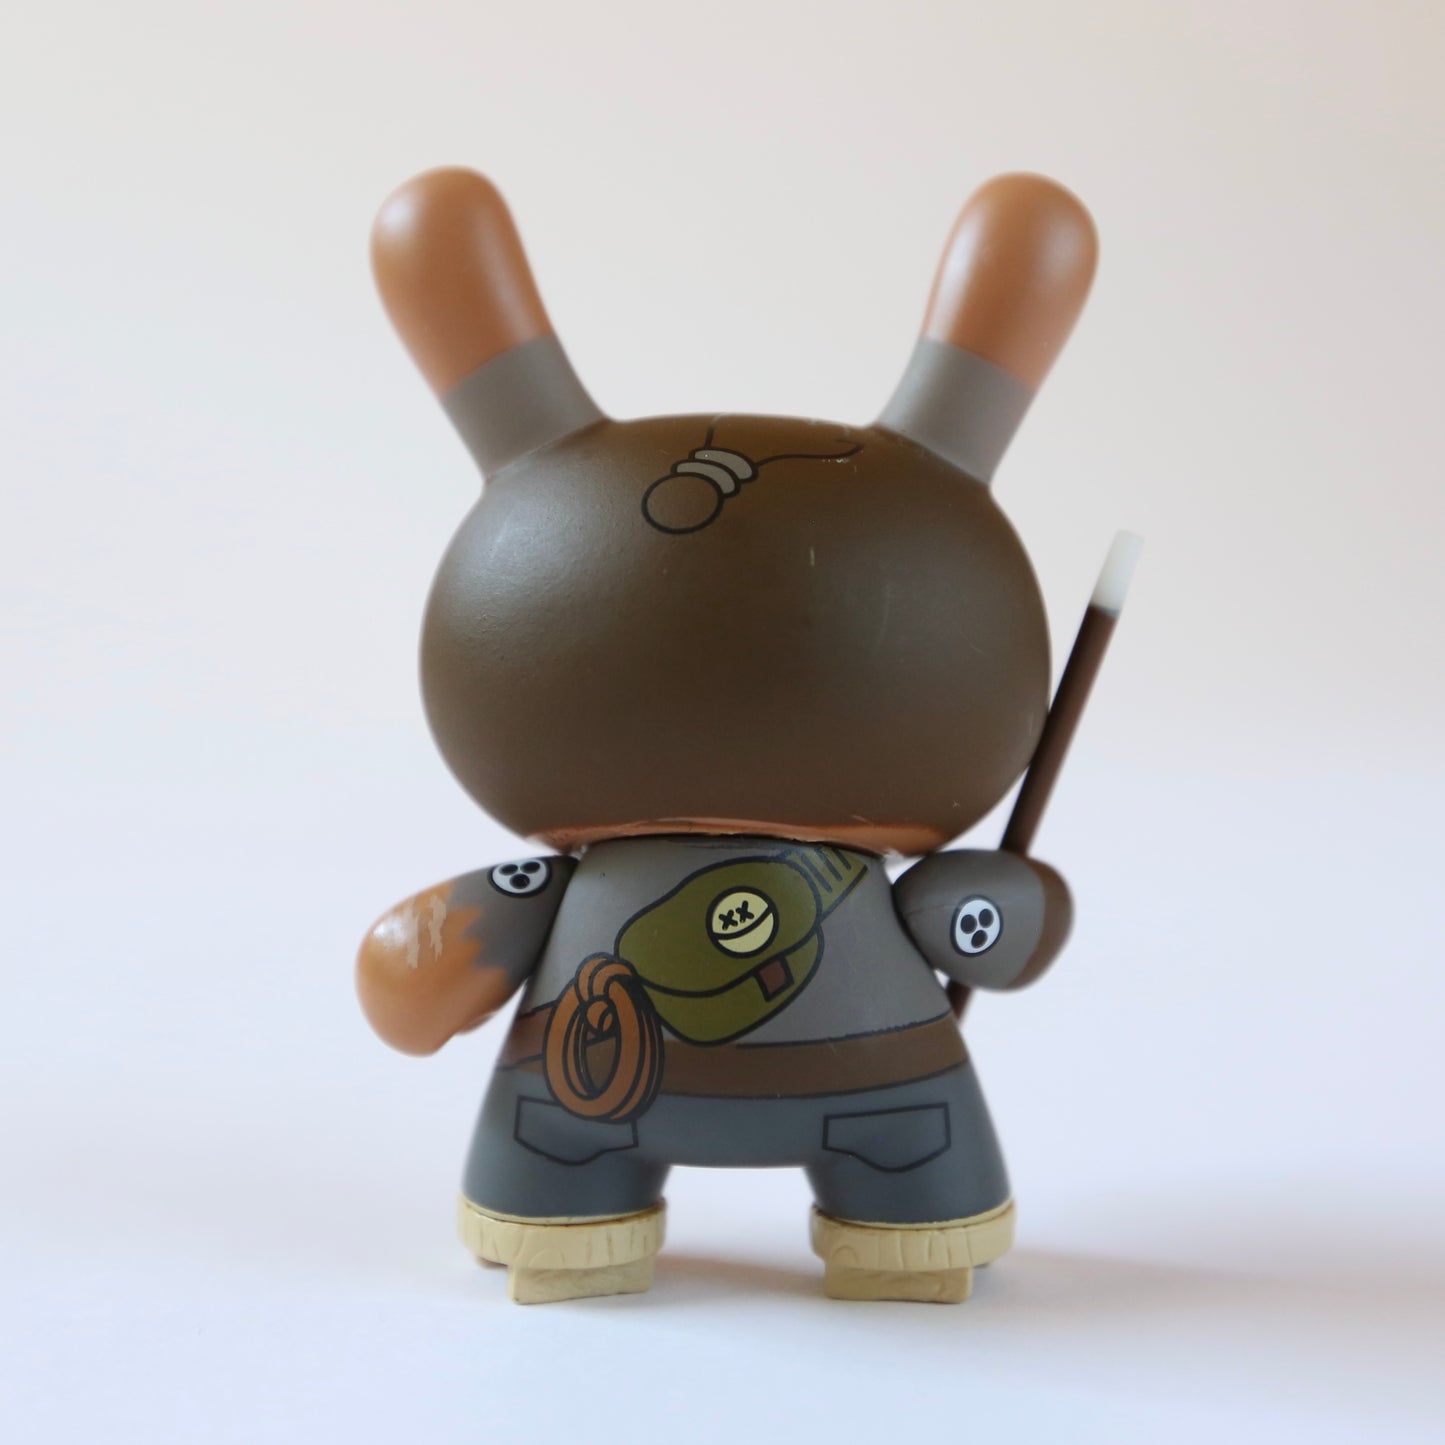 "Sanjuro - The Ronin" (2/16) 3in Dunny by Huck Gee x Kidrobot